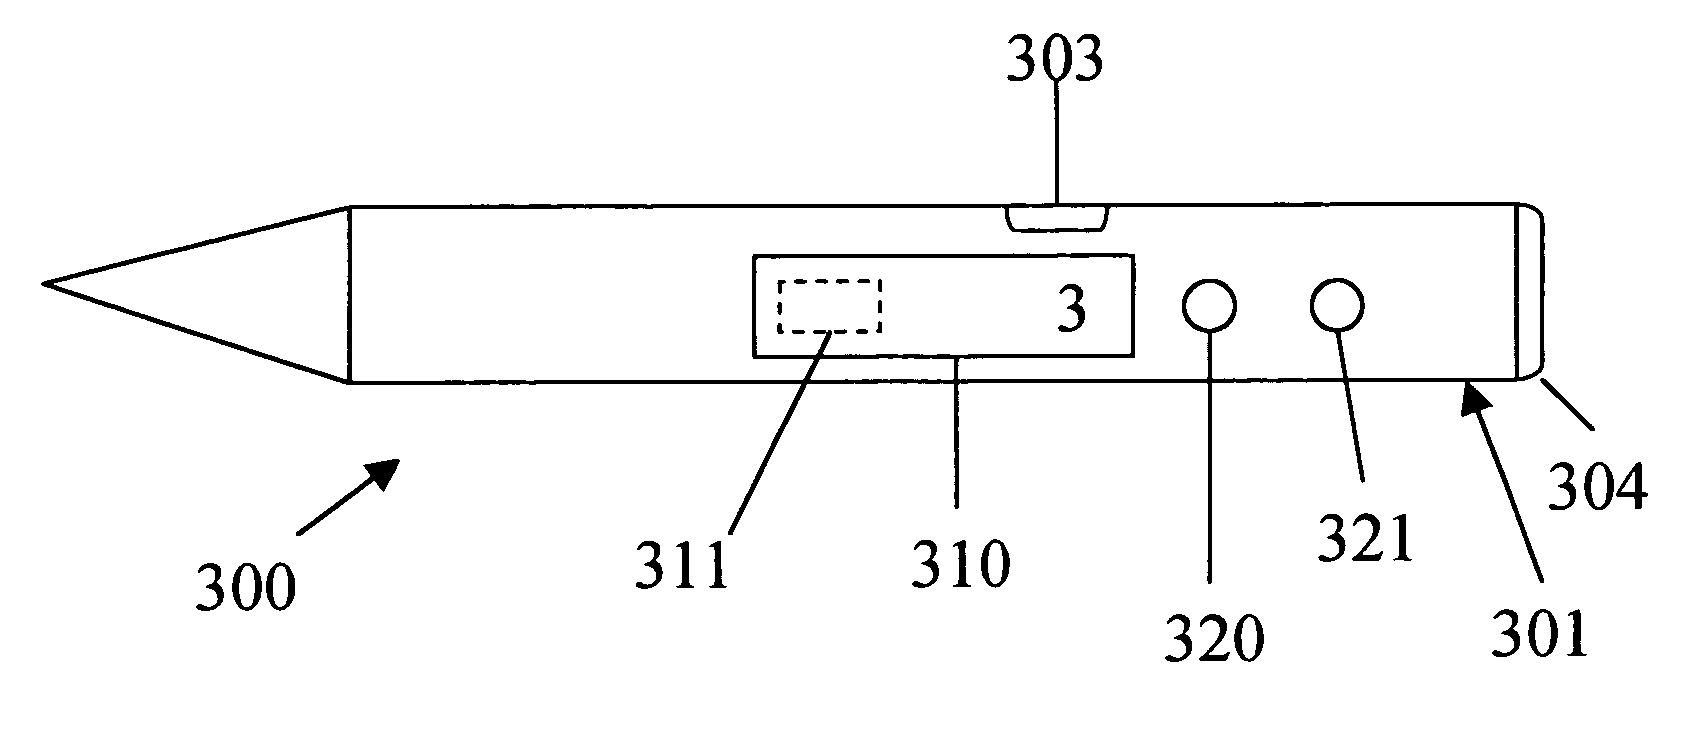 Method and apparatus for providing communication transmissions